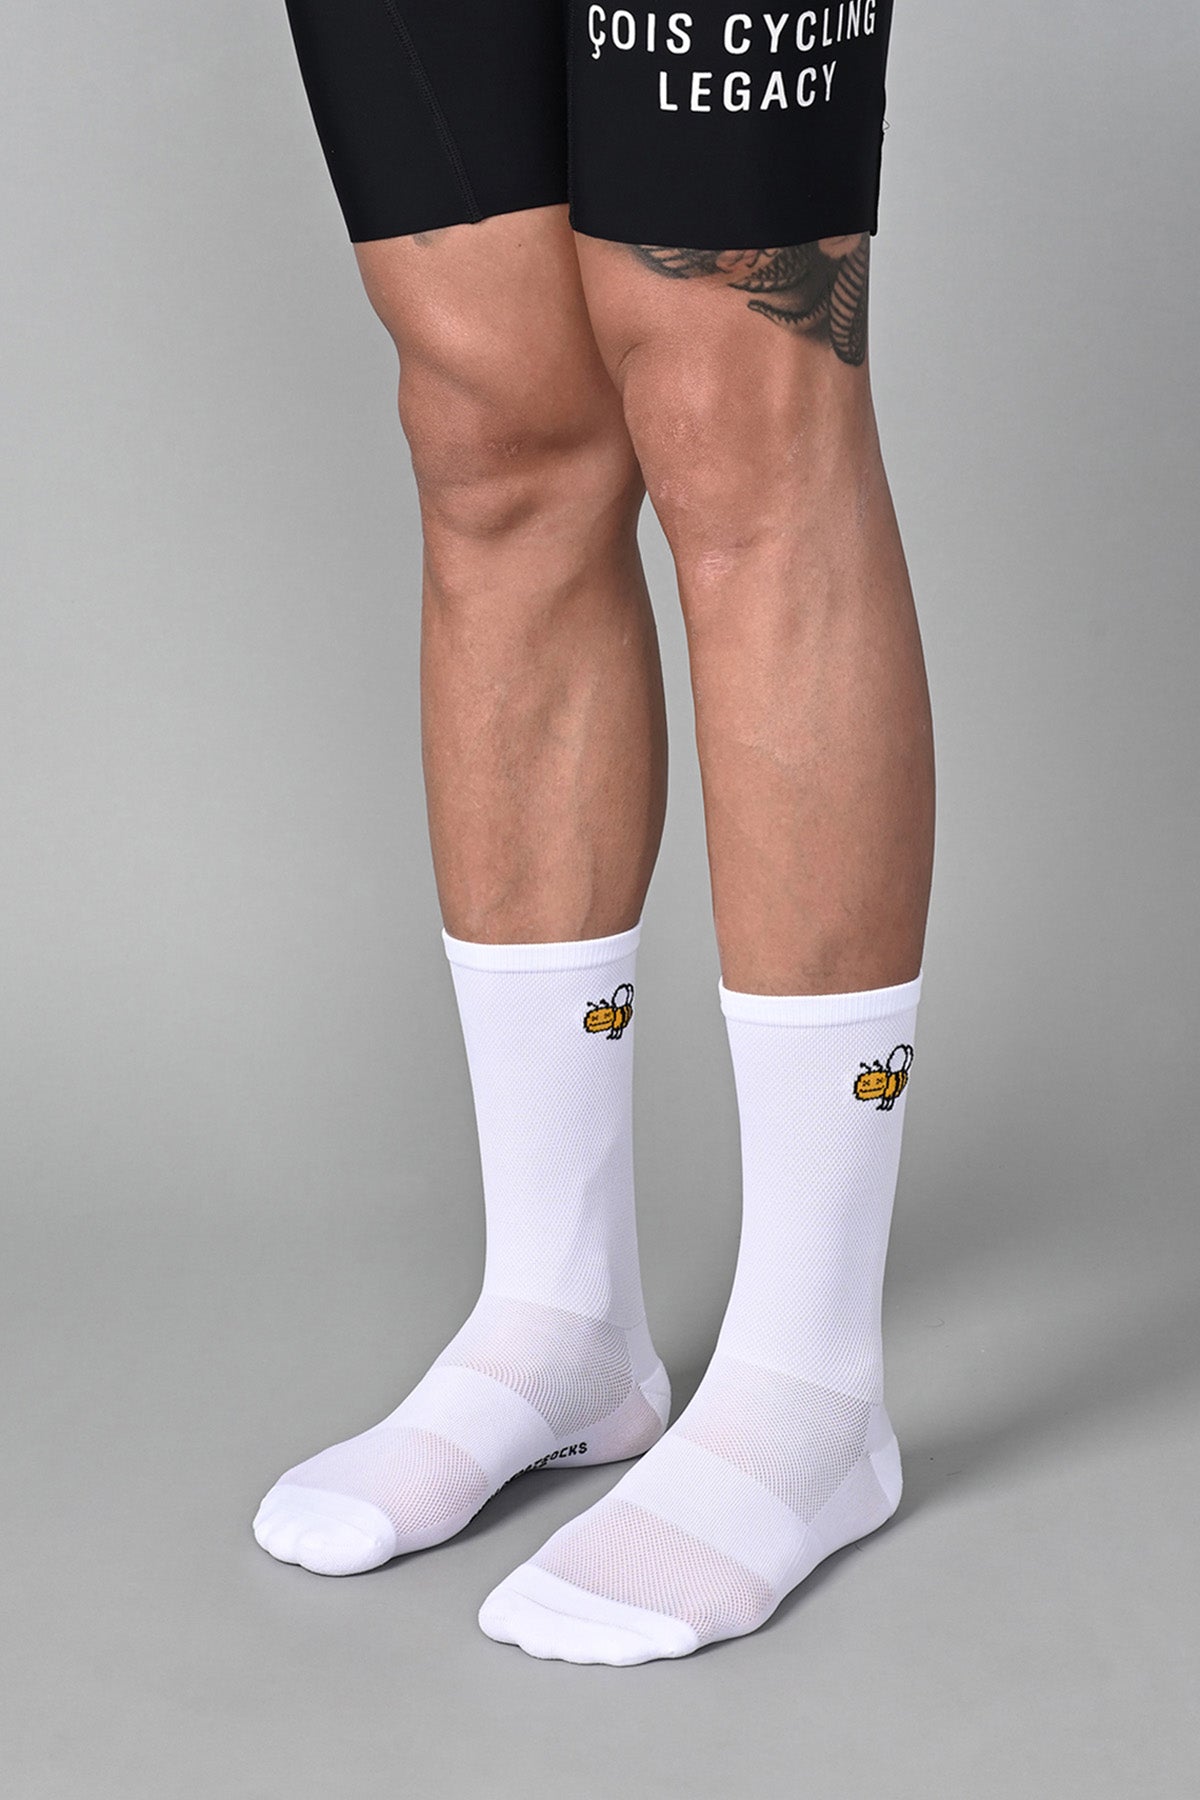 HONEY BEE - WHITE FRONT SIDE | BEST CYCLING SOCKS